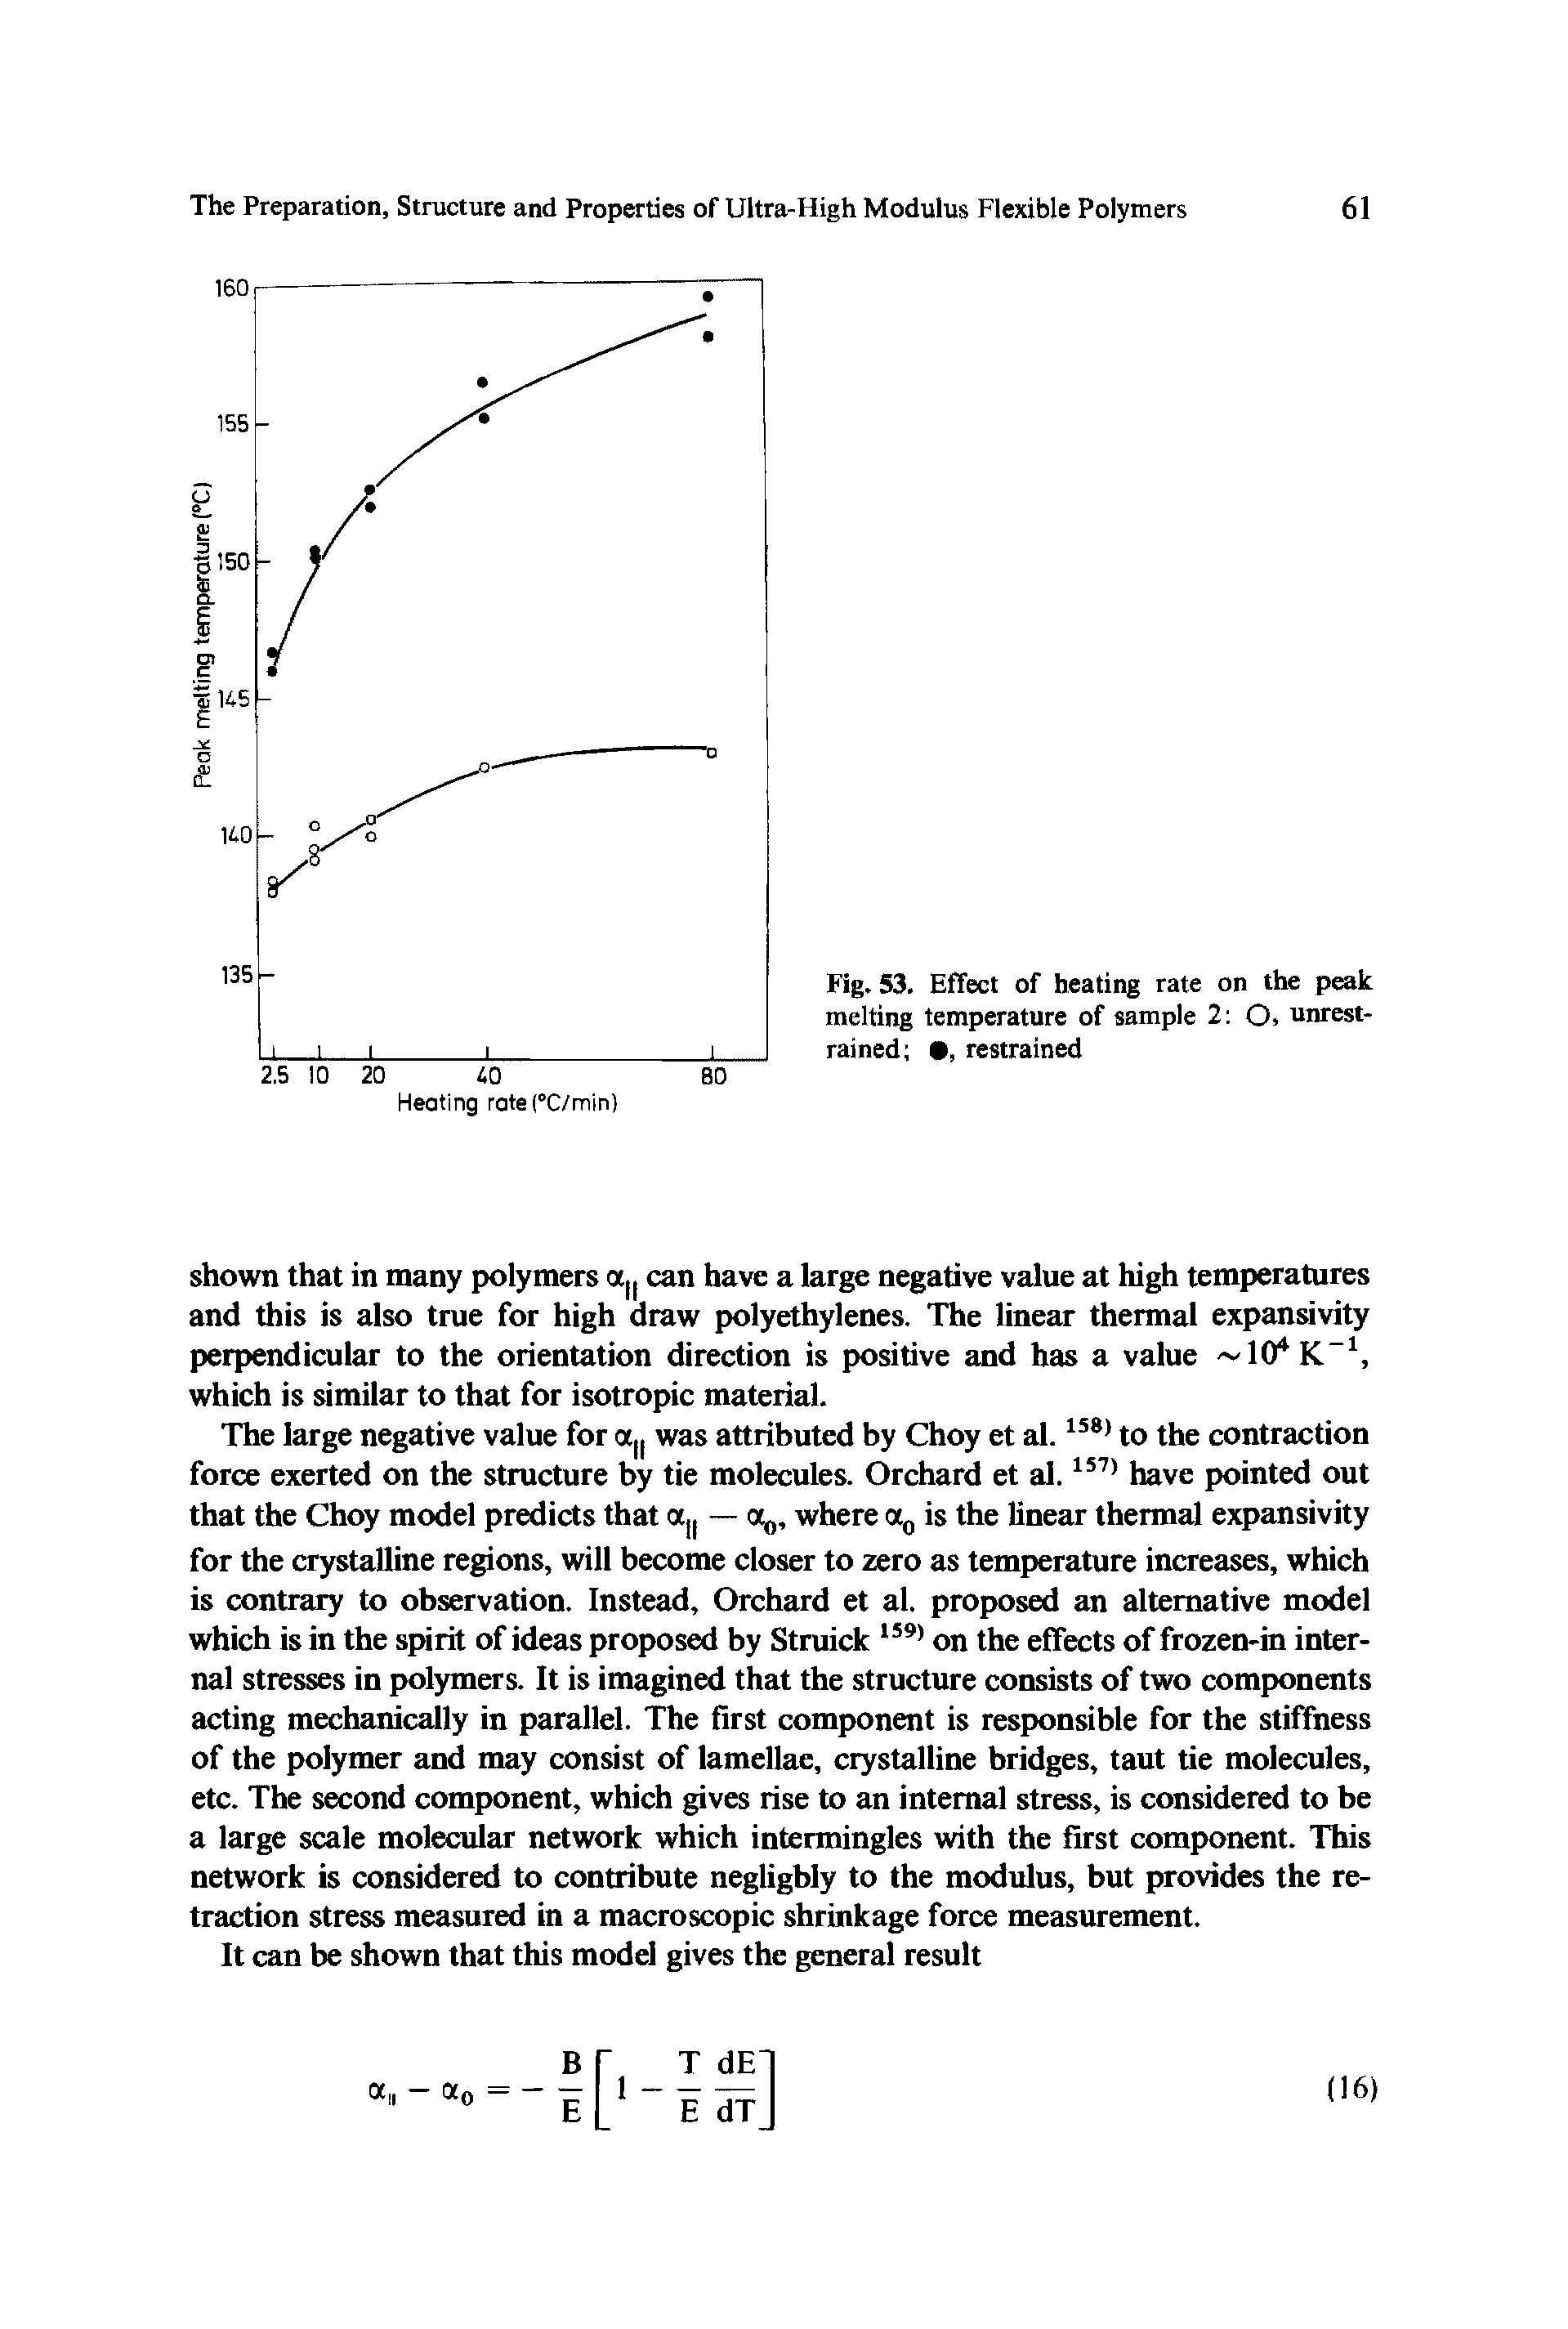 Fig. 53. Eflect of heating rate on the peak melting temperature of sample 2 O, unrestrained , restrained...